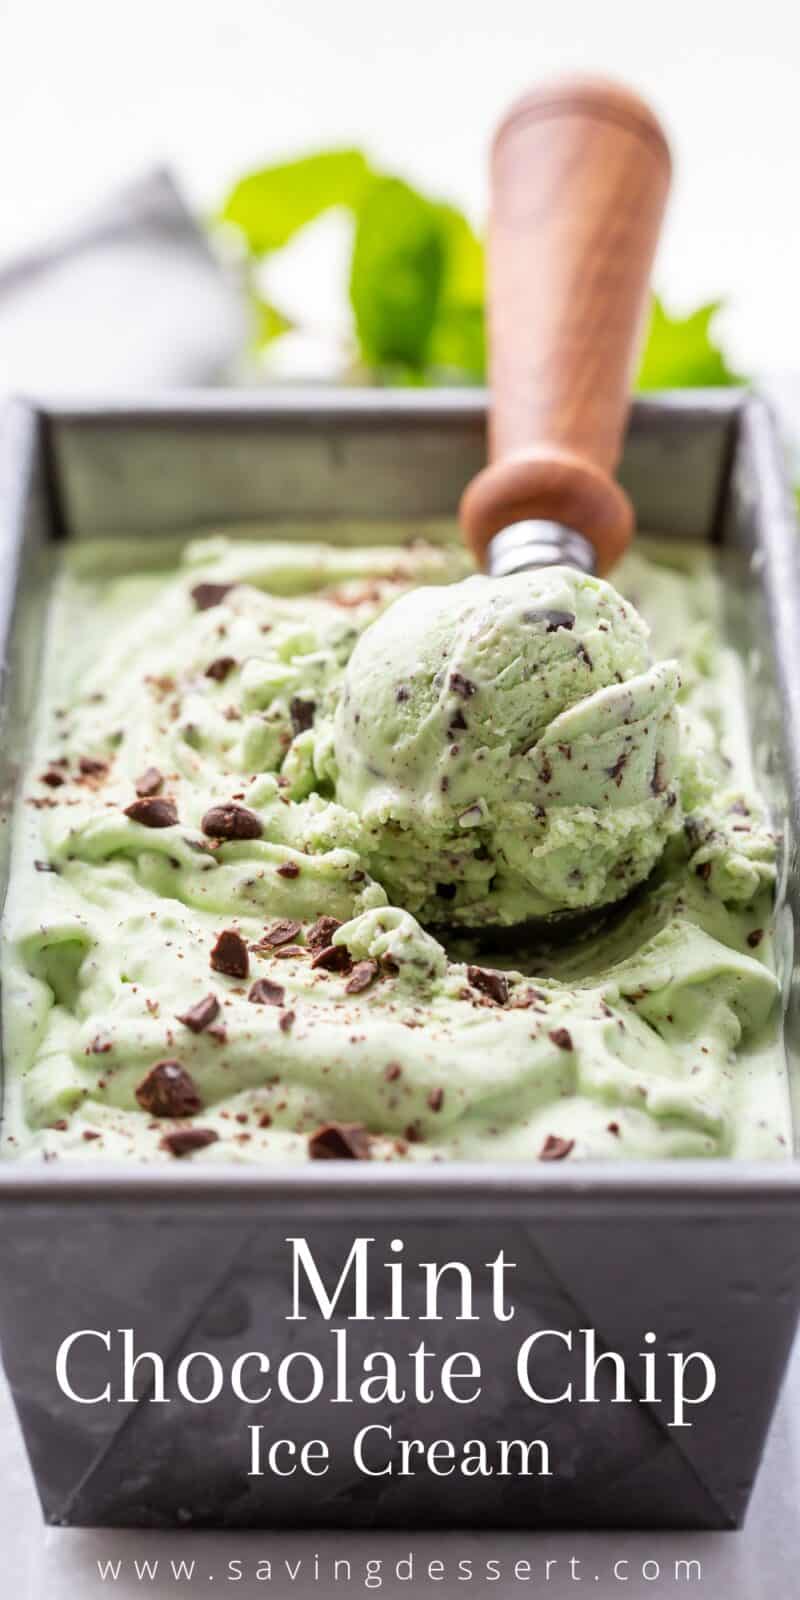 A closeup of a loaf pan filled with mint chocolate chip ice cream and an ice cream scoop